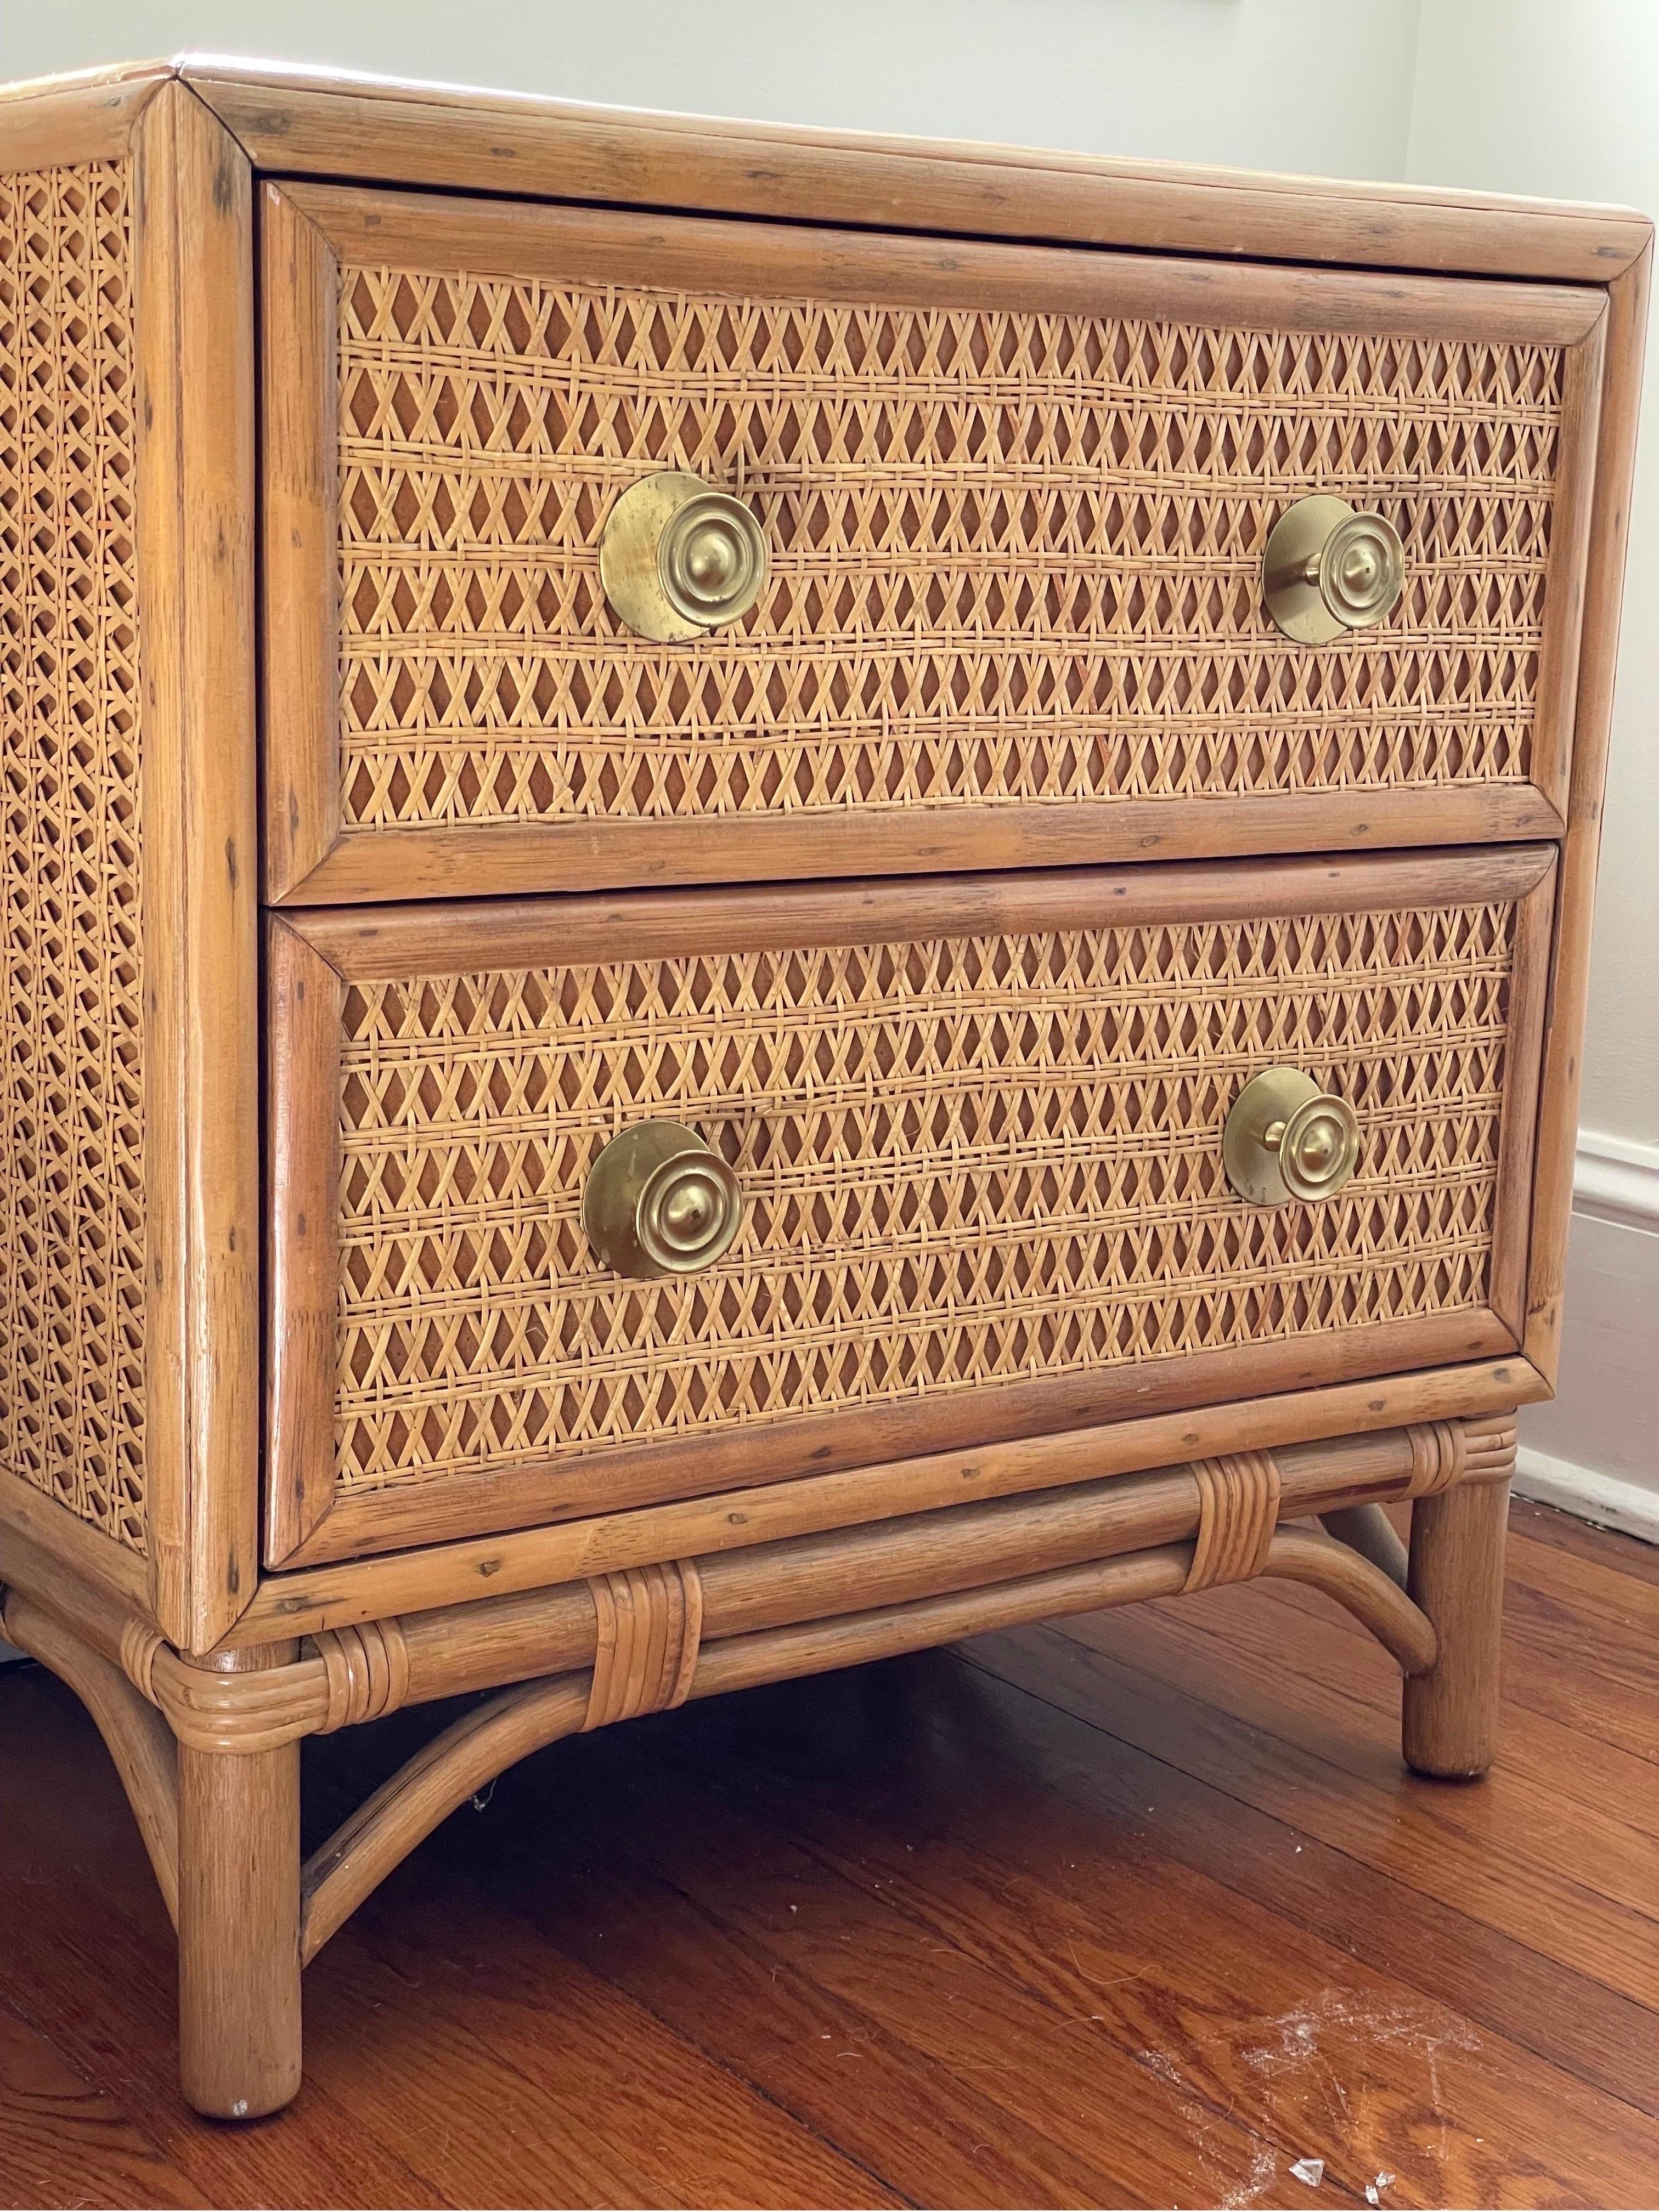 Wonderful rattan and cane nightstand or side chest of drawers with brass pull. Coastal chic with great contrasting of rattan frame and cane accent. Glass top for smooth surface protection. Sturdy and heavy.
Can deliver to NYC/Philly $300
see other